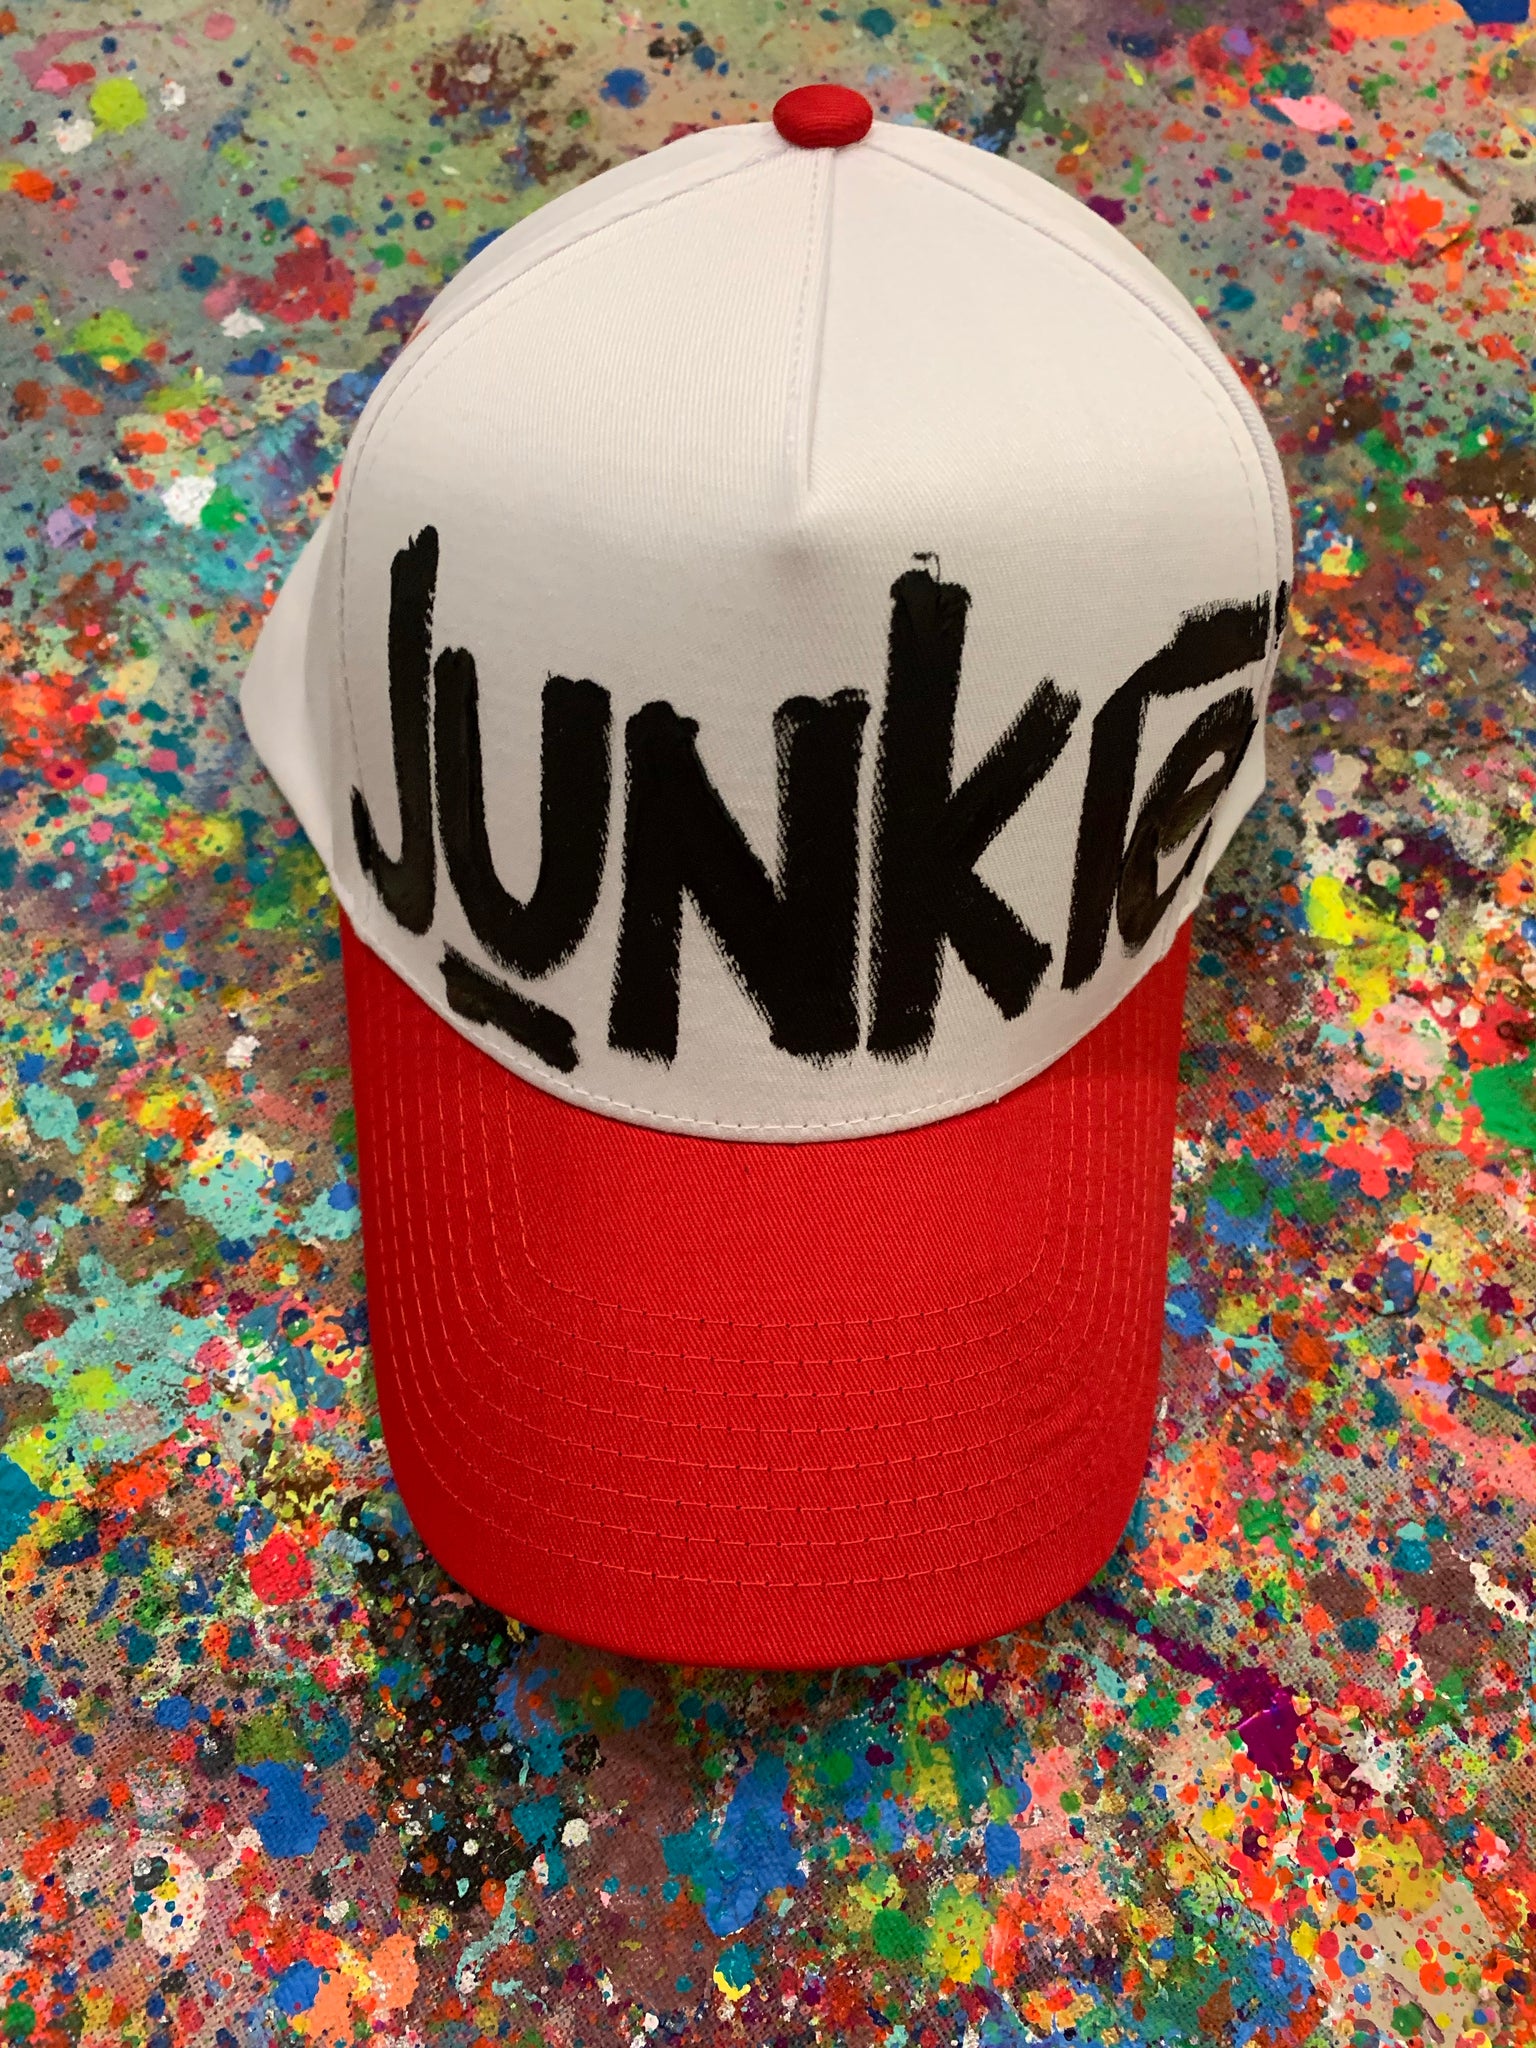 Chi-Town White Junkie SnapBack